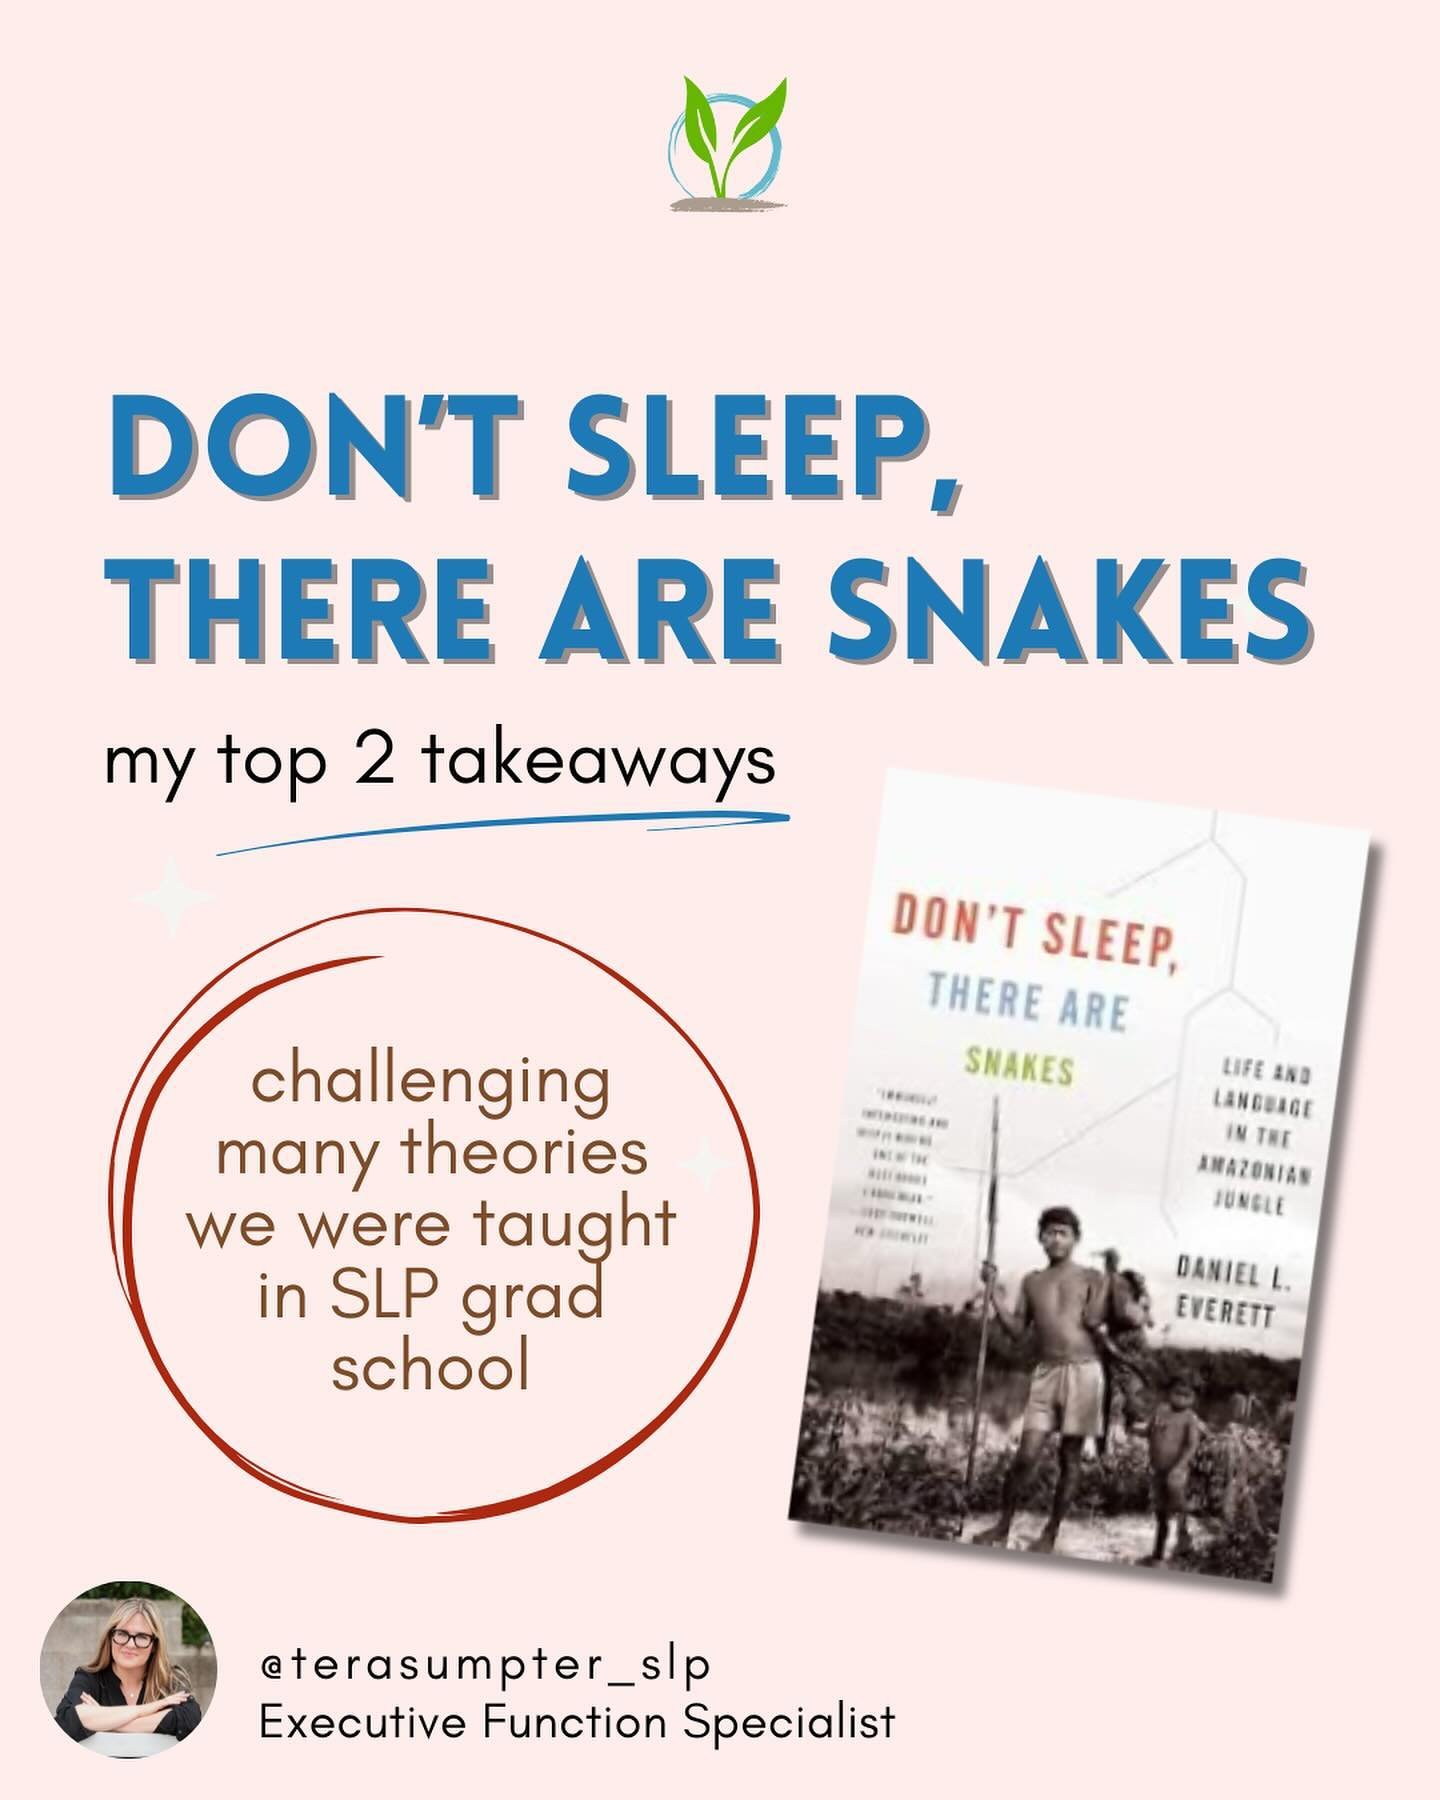 Such a fascinating book! 

I recently finished this book written by Daniel Everett, linguist and professor of cognitive sciences. Everett&rsquo;s book, Don&rsquo;t Sleep, There are Snakes, is about his work living
30-years in the Amazon with the Pira